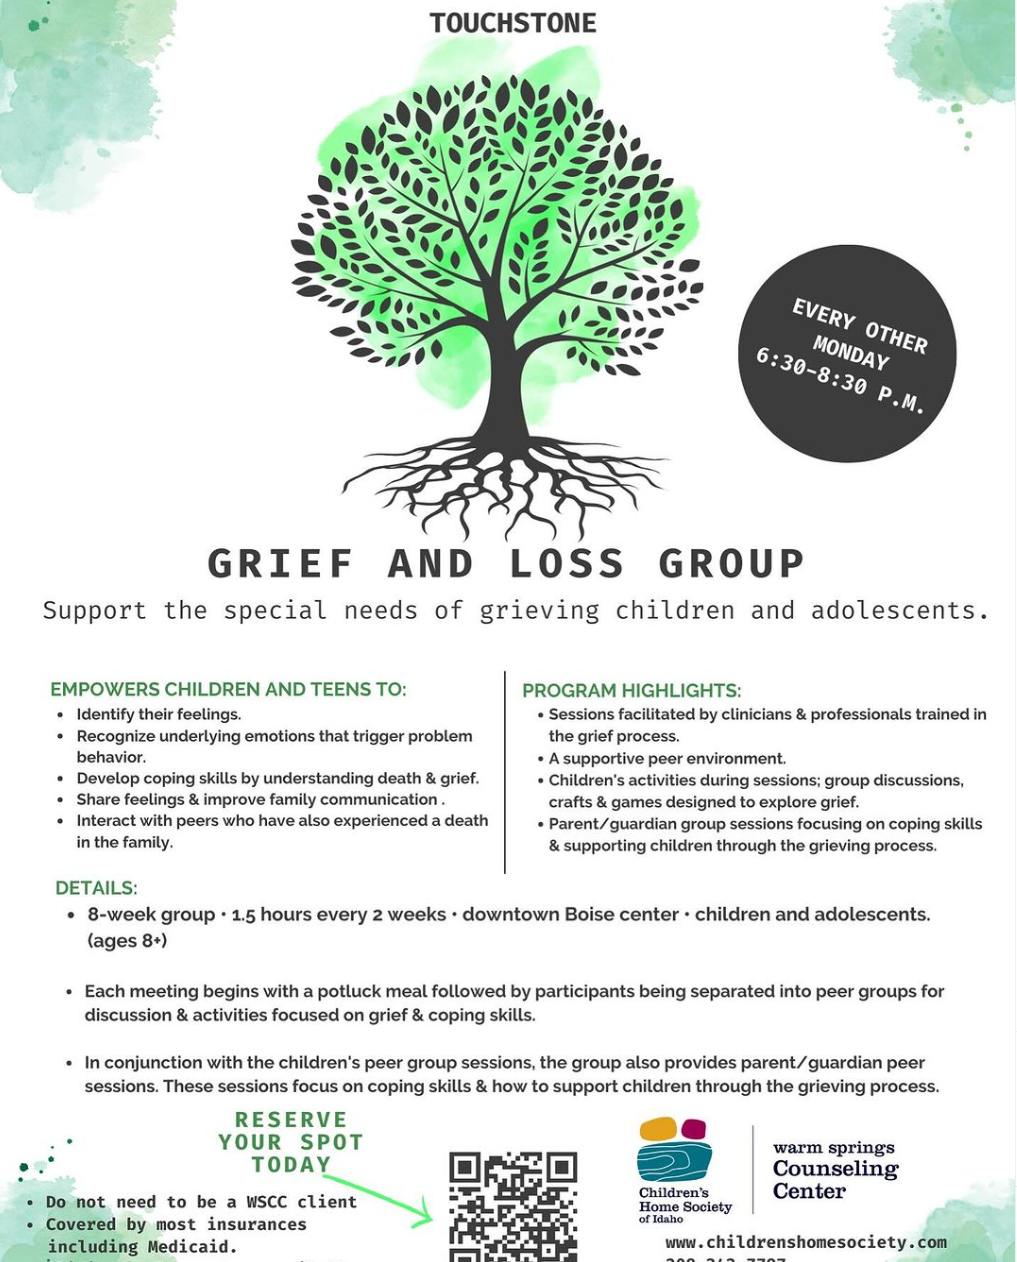 Touchstone a Free Program for Grieving Children & Adolescents